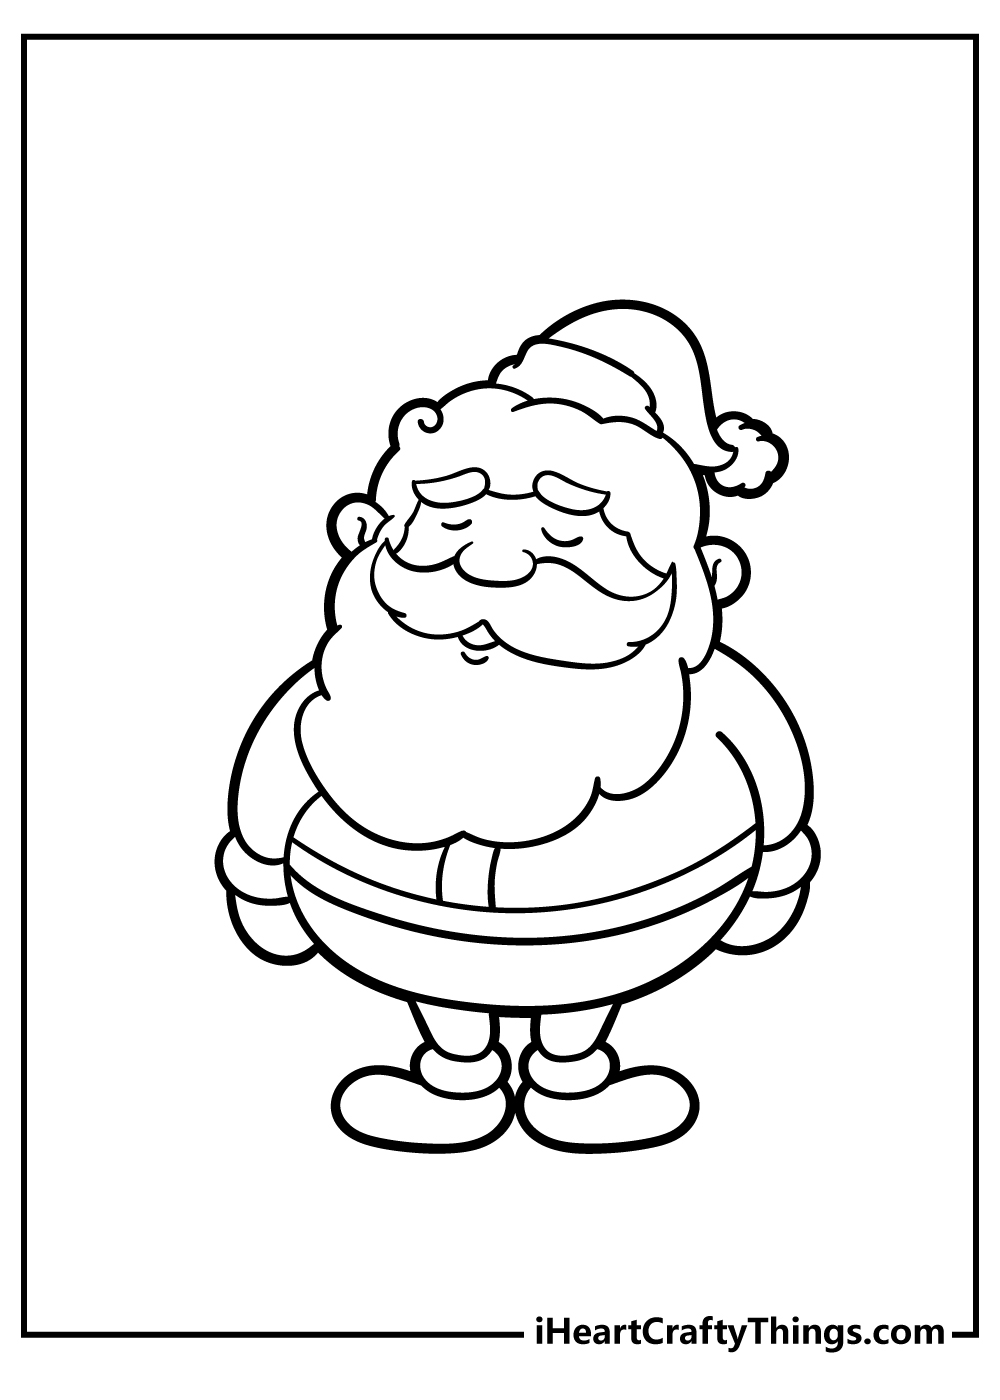 Cute Santa Christmas Coloring Pages for adults free printable